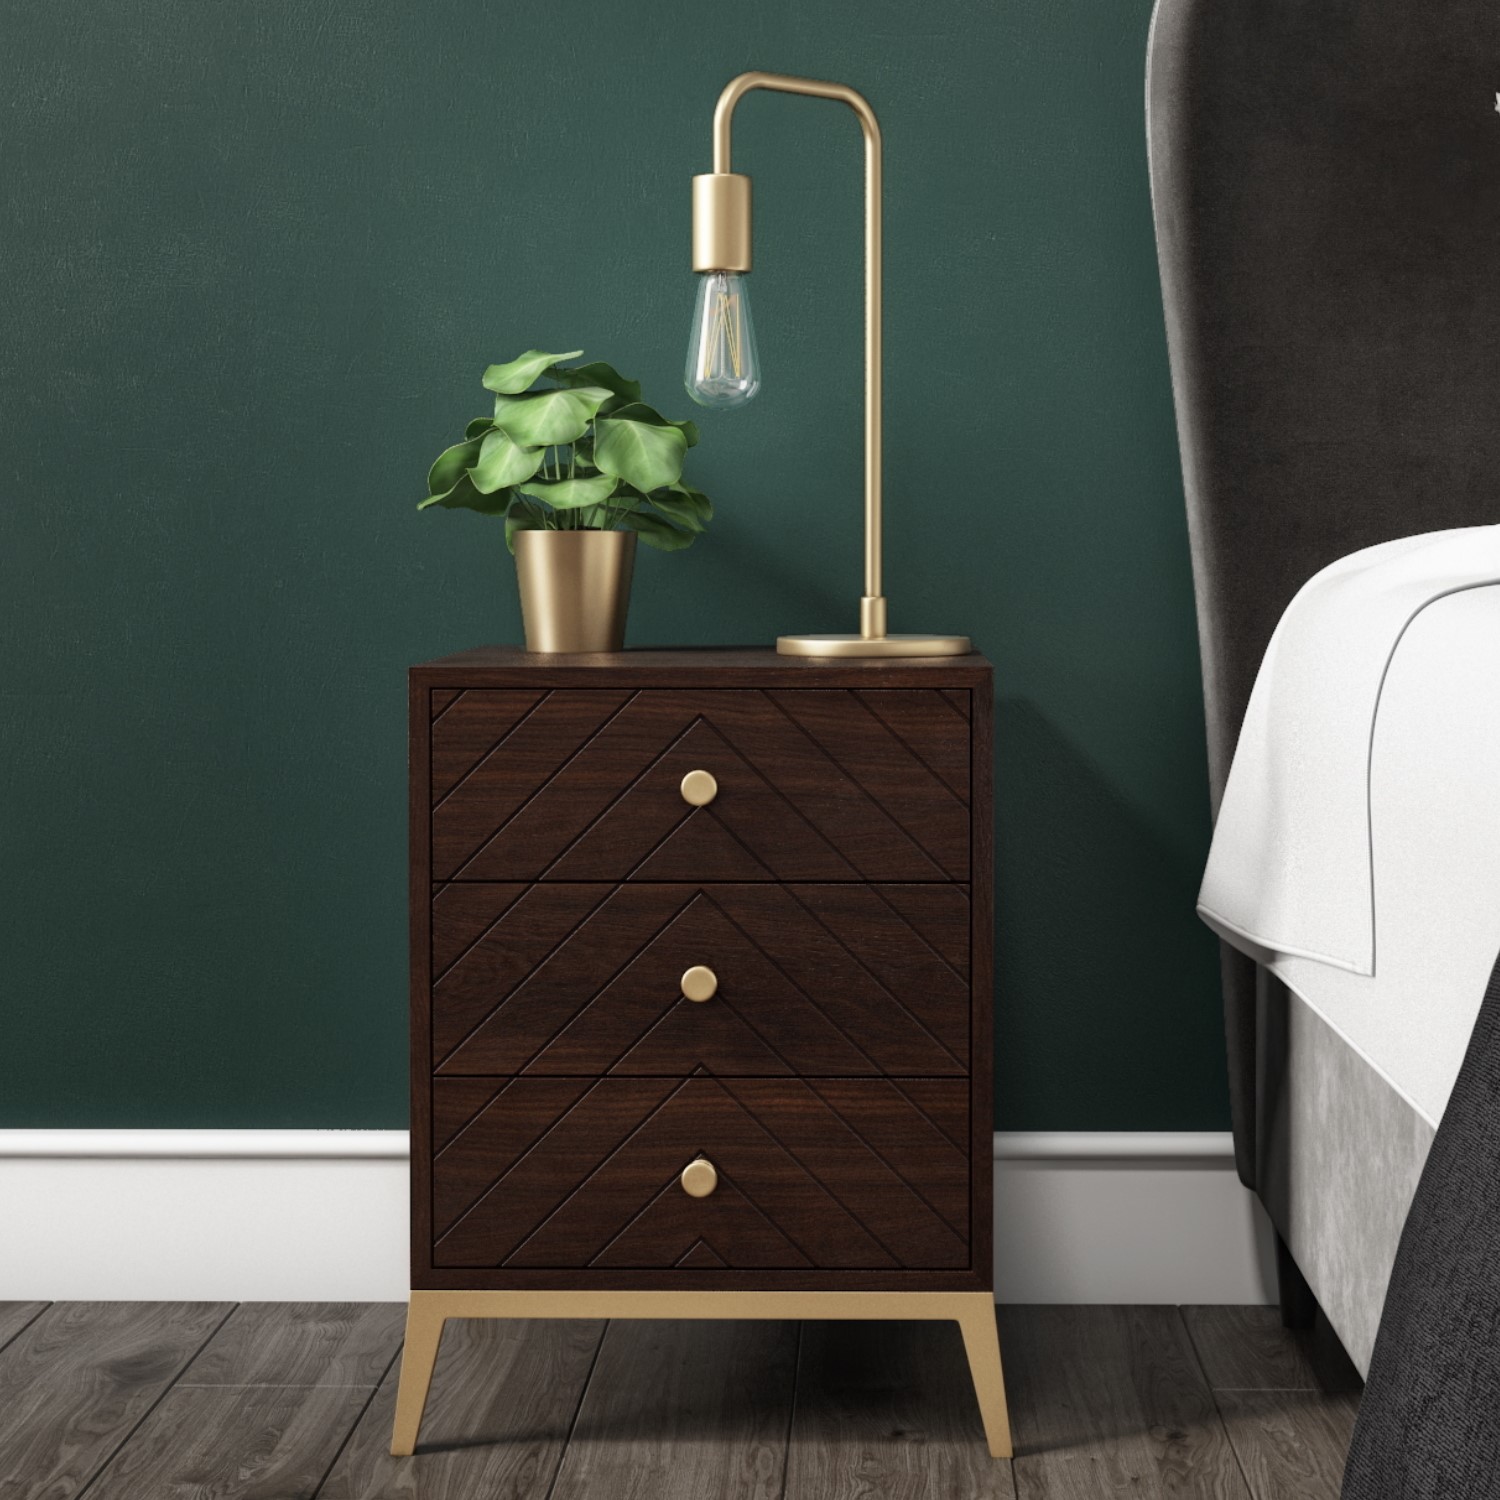 Photo of Mango wood chevron 3 drawer bedside table with legs - jude